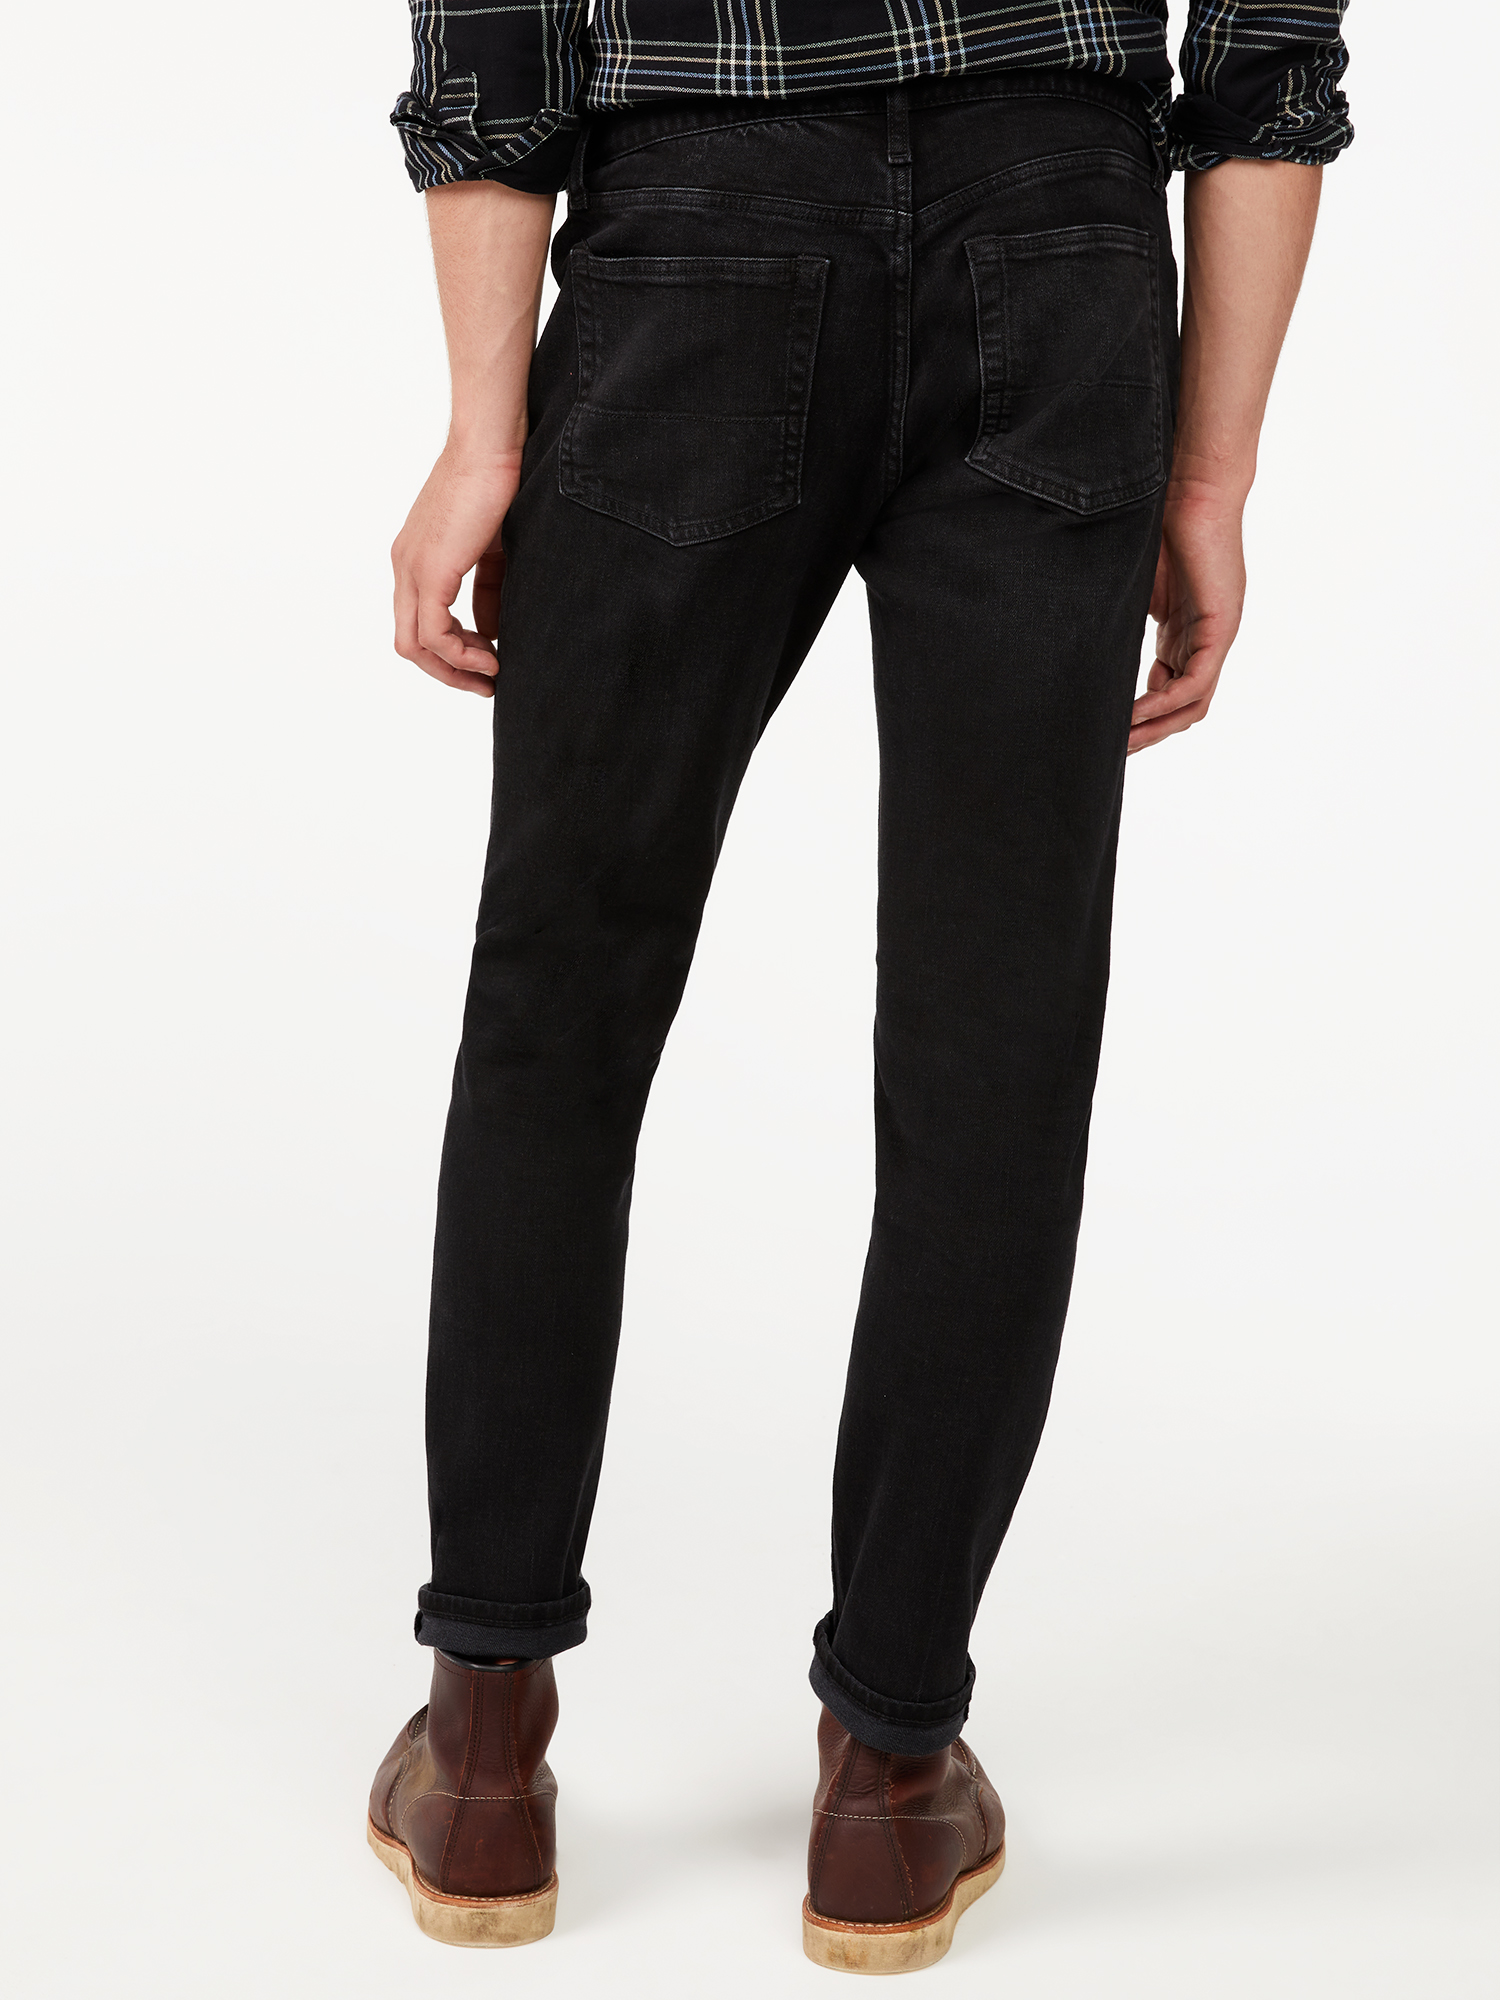 Free Assembly Men's Slim Fit Jeans - image 5 of 5